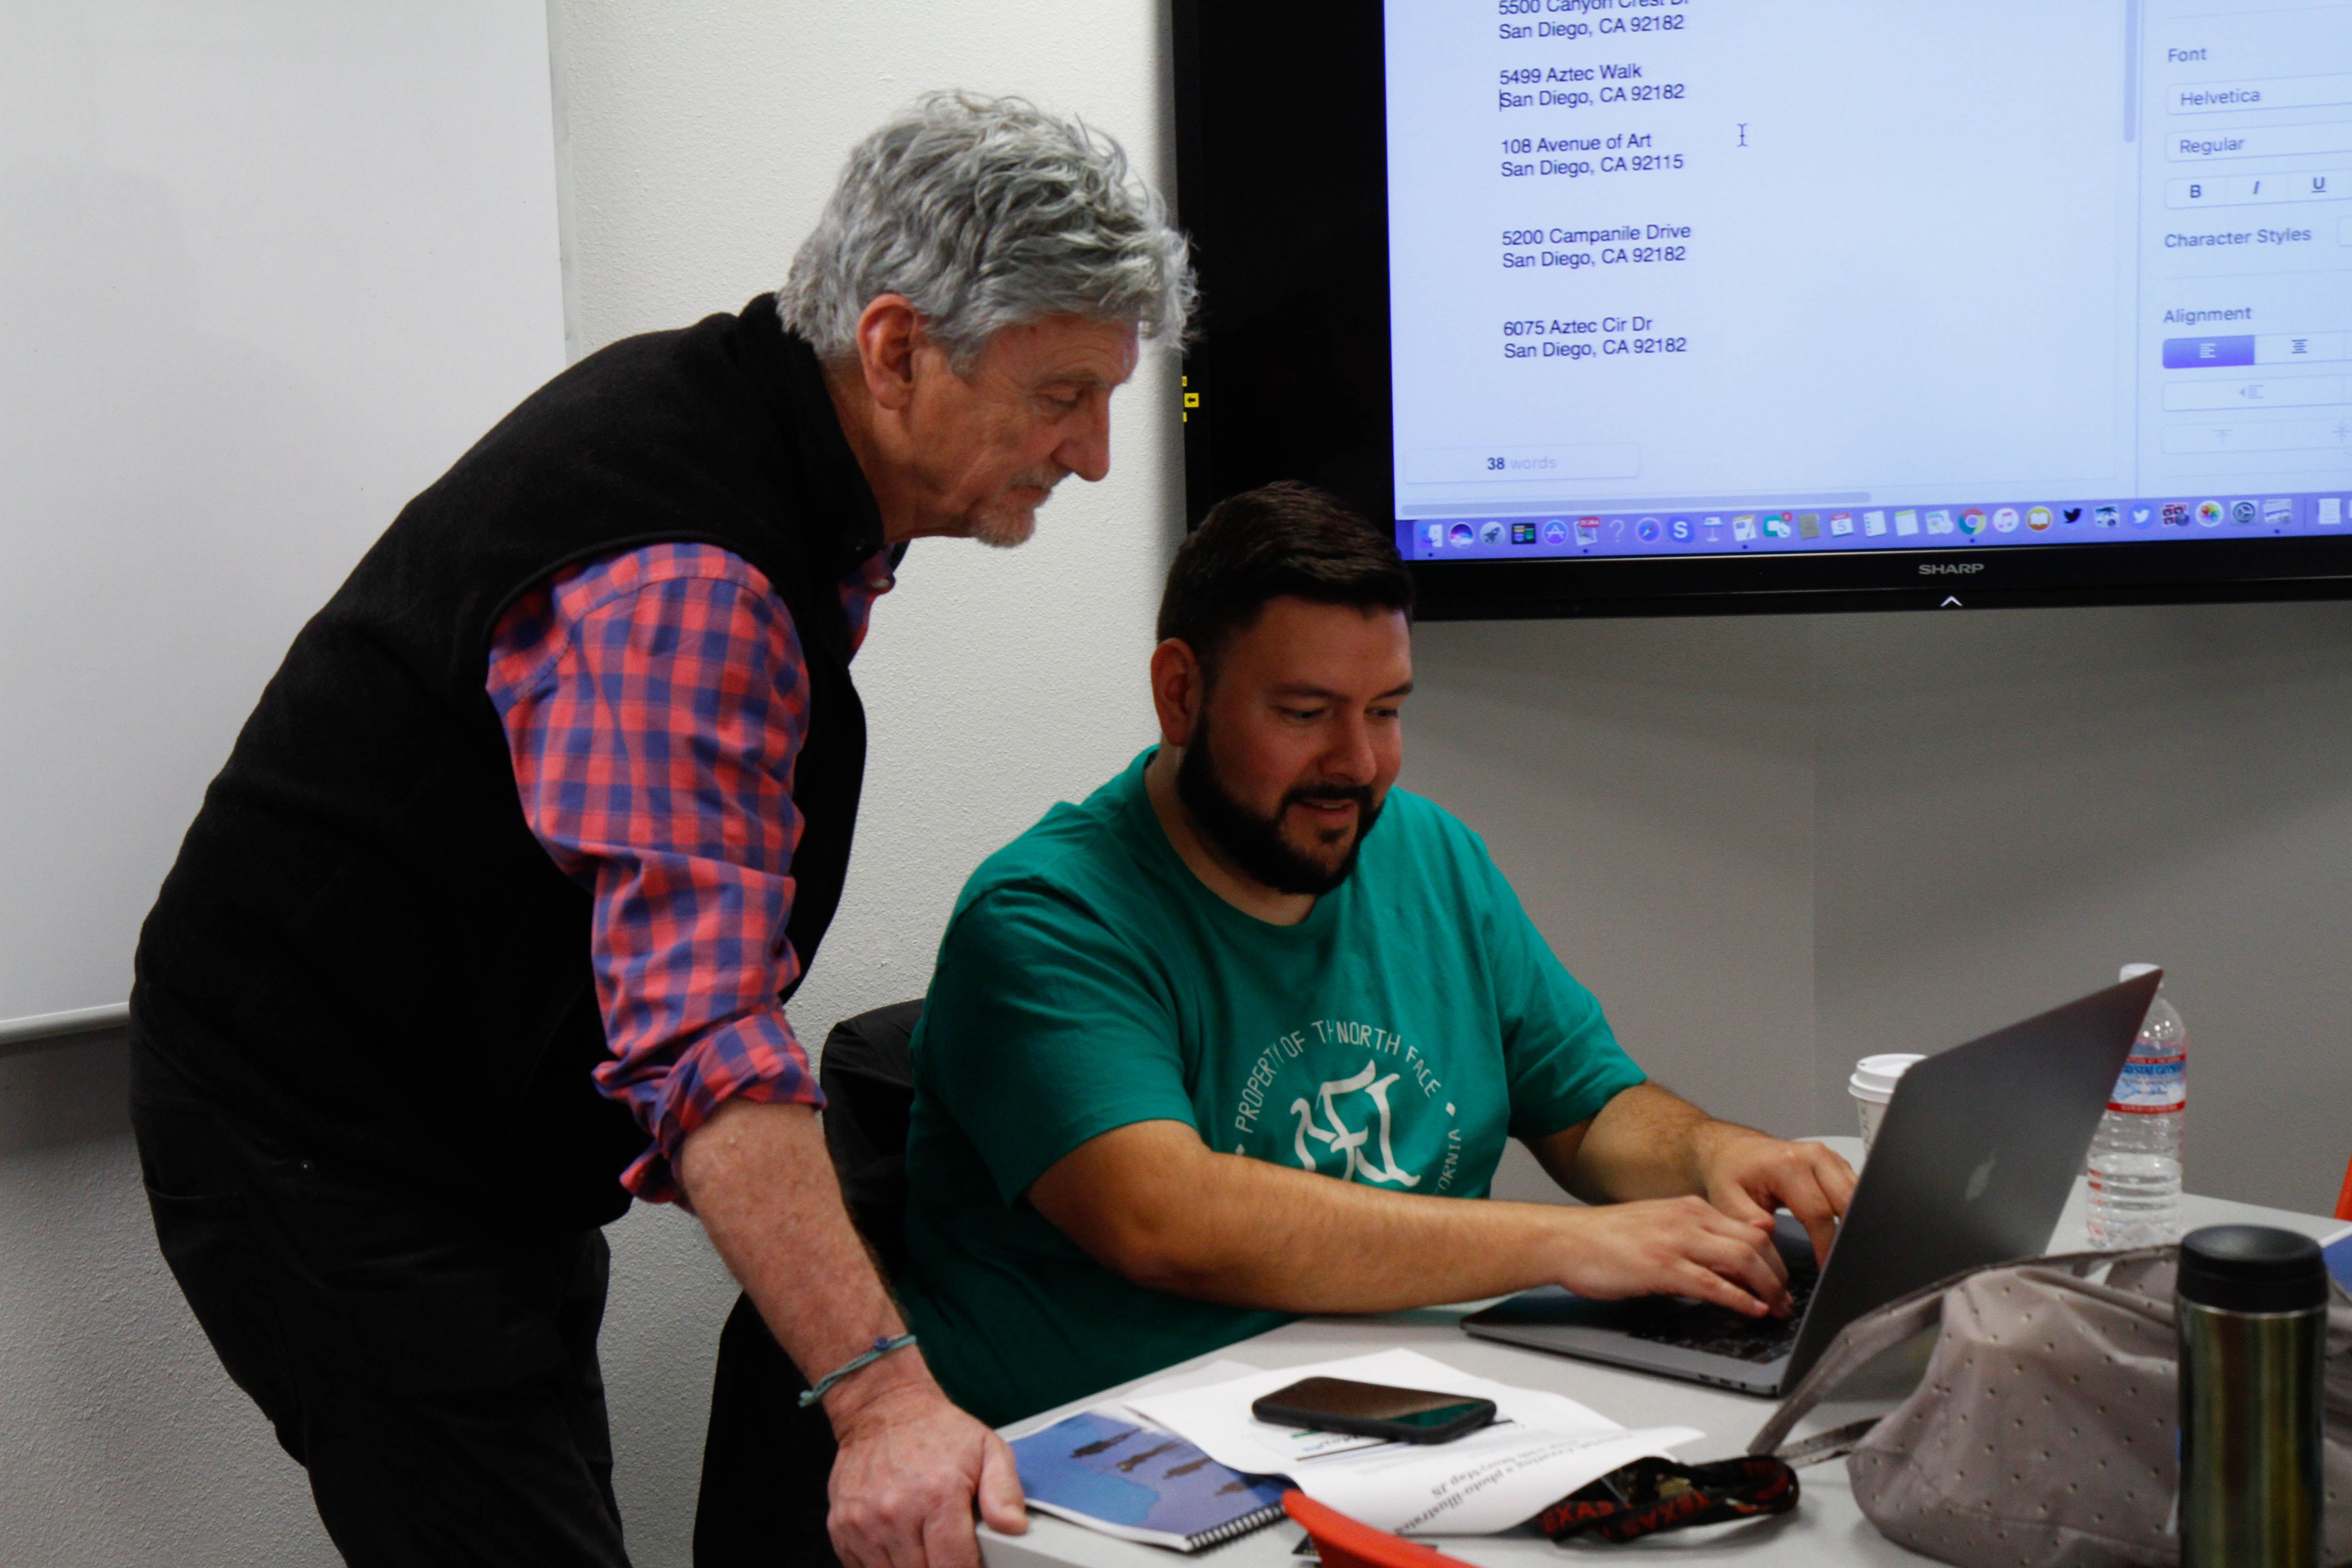 Don Belt advises a faculty member of the diversity department as he creates his San Diego State University Walk on Campus photo slideshow using StoryMap. Image by Lauren Shepherd. United States, 2017.